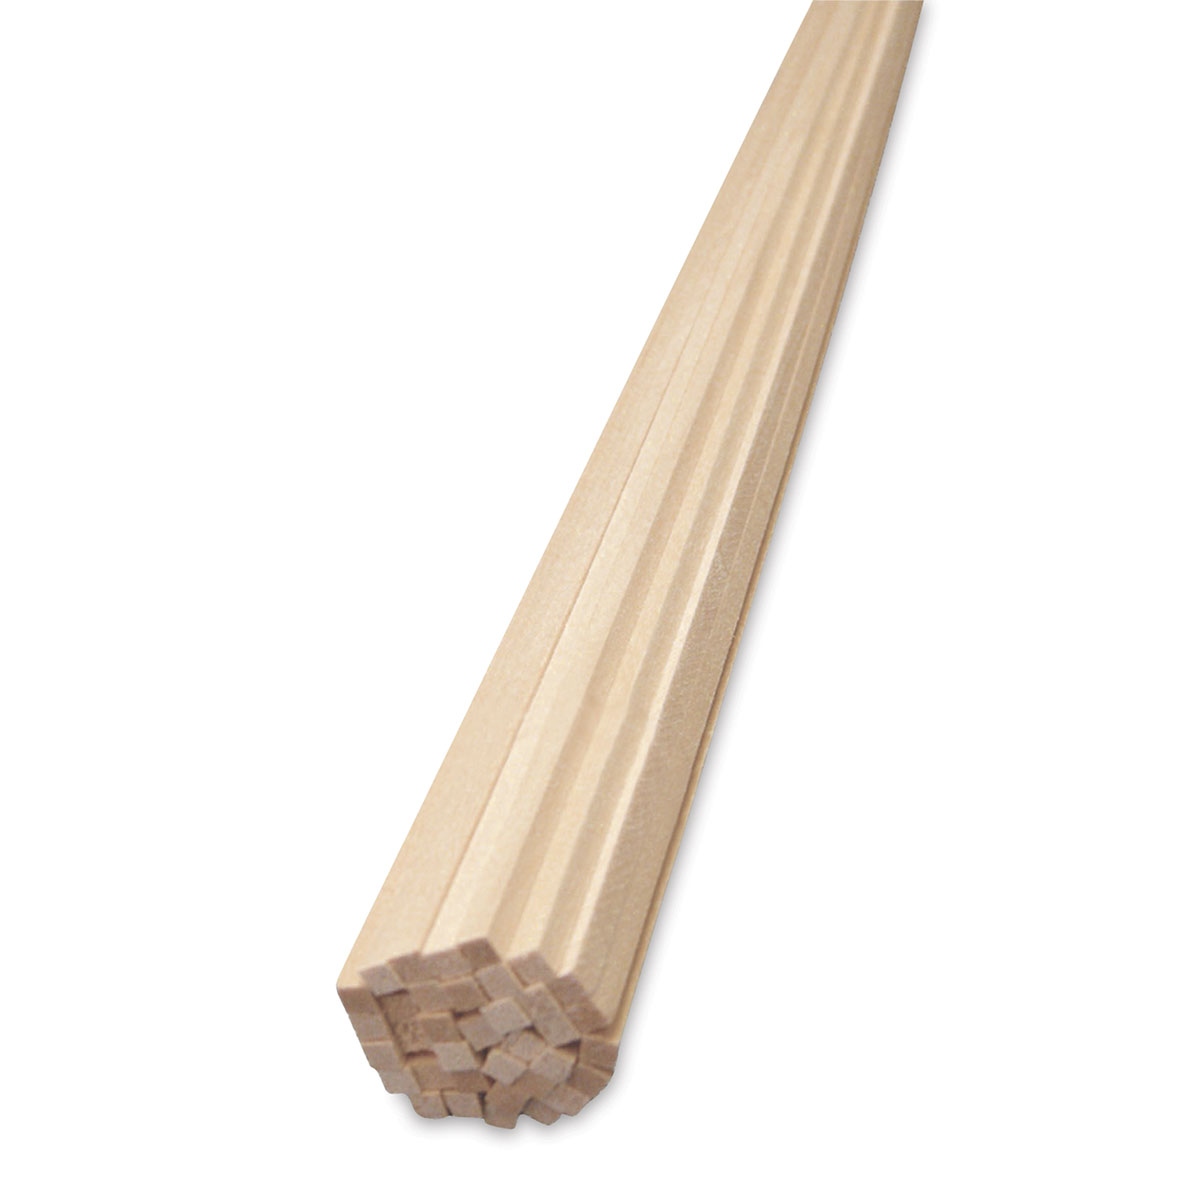 Midwest Products 1/8 in. W x 3 ft. L x 1/4 in. T Basswood Strip